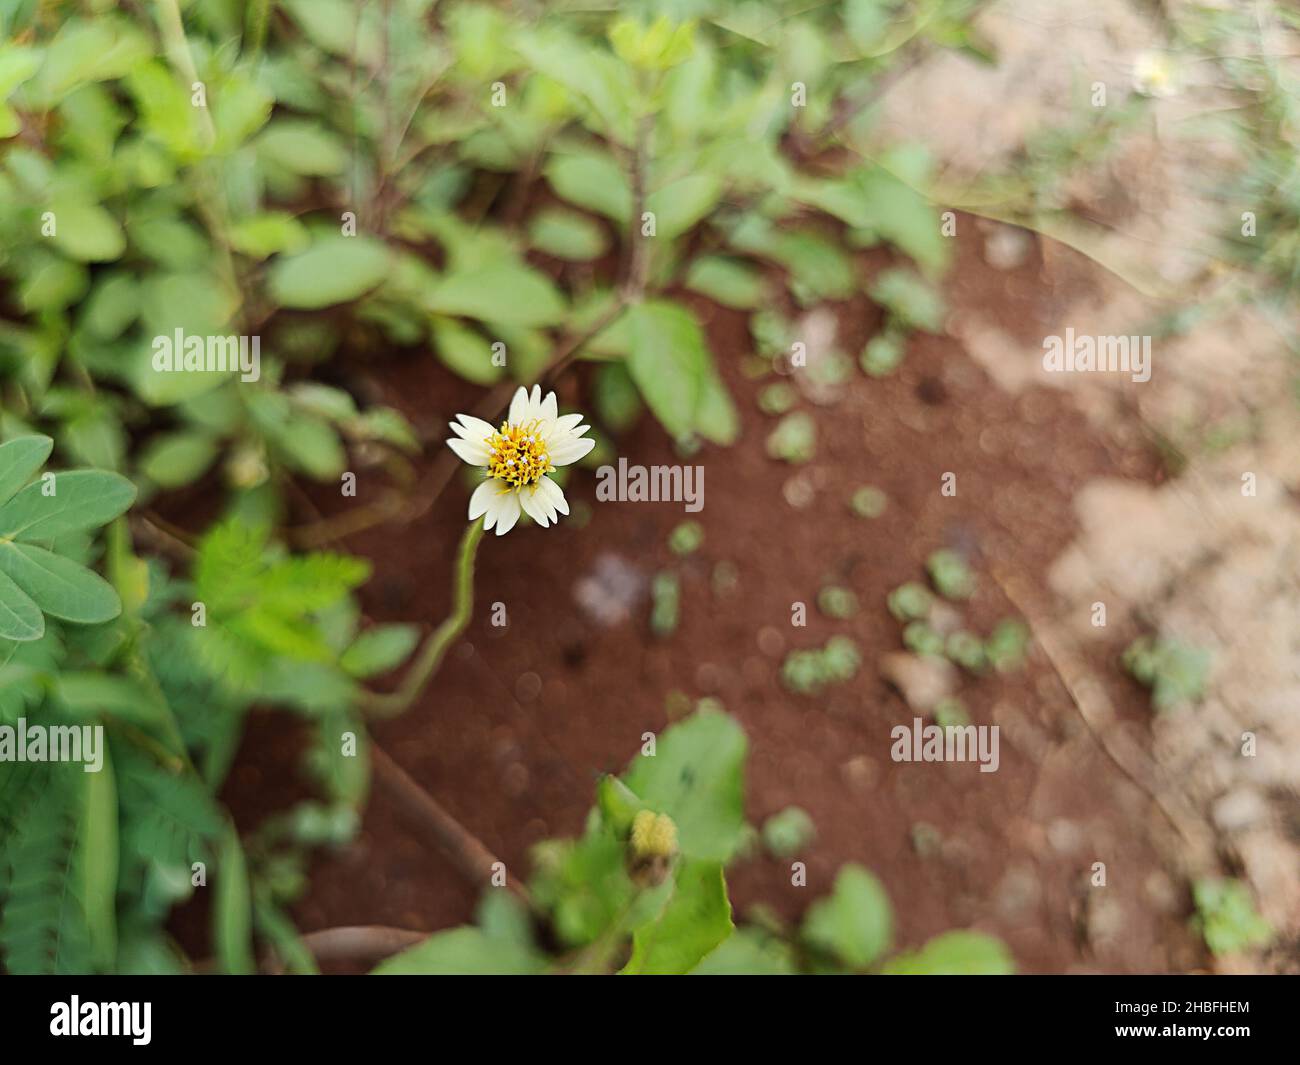 A selective focus shot of a Tridax procumbens flower surrounded by lush green leaves Stock Photo